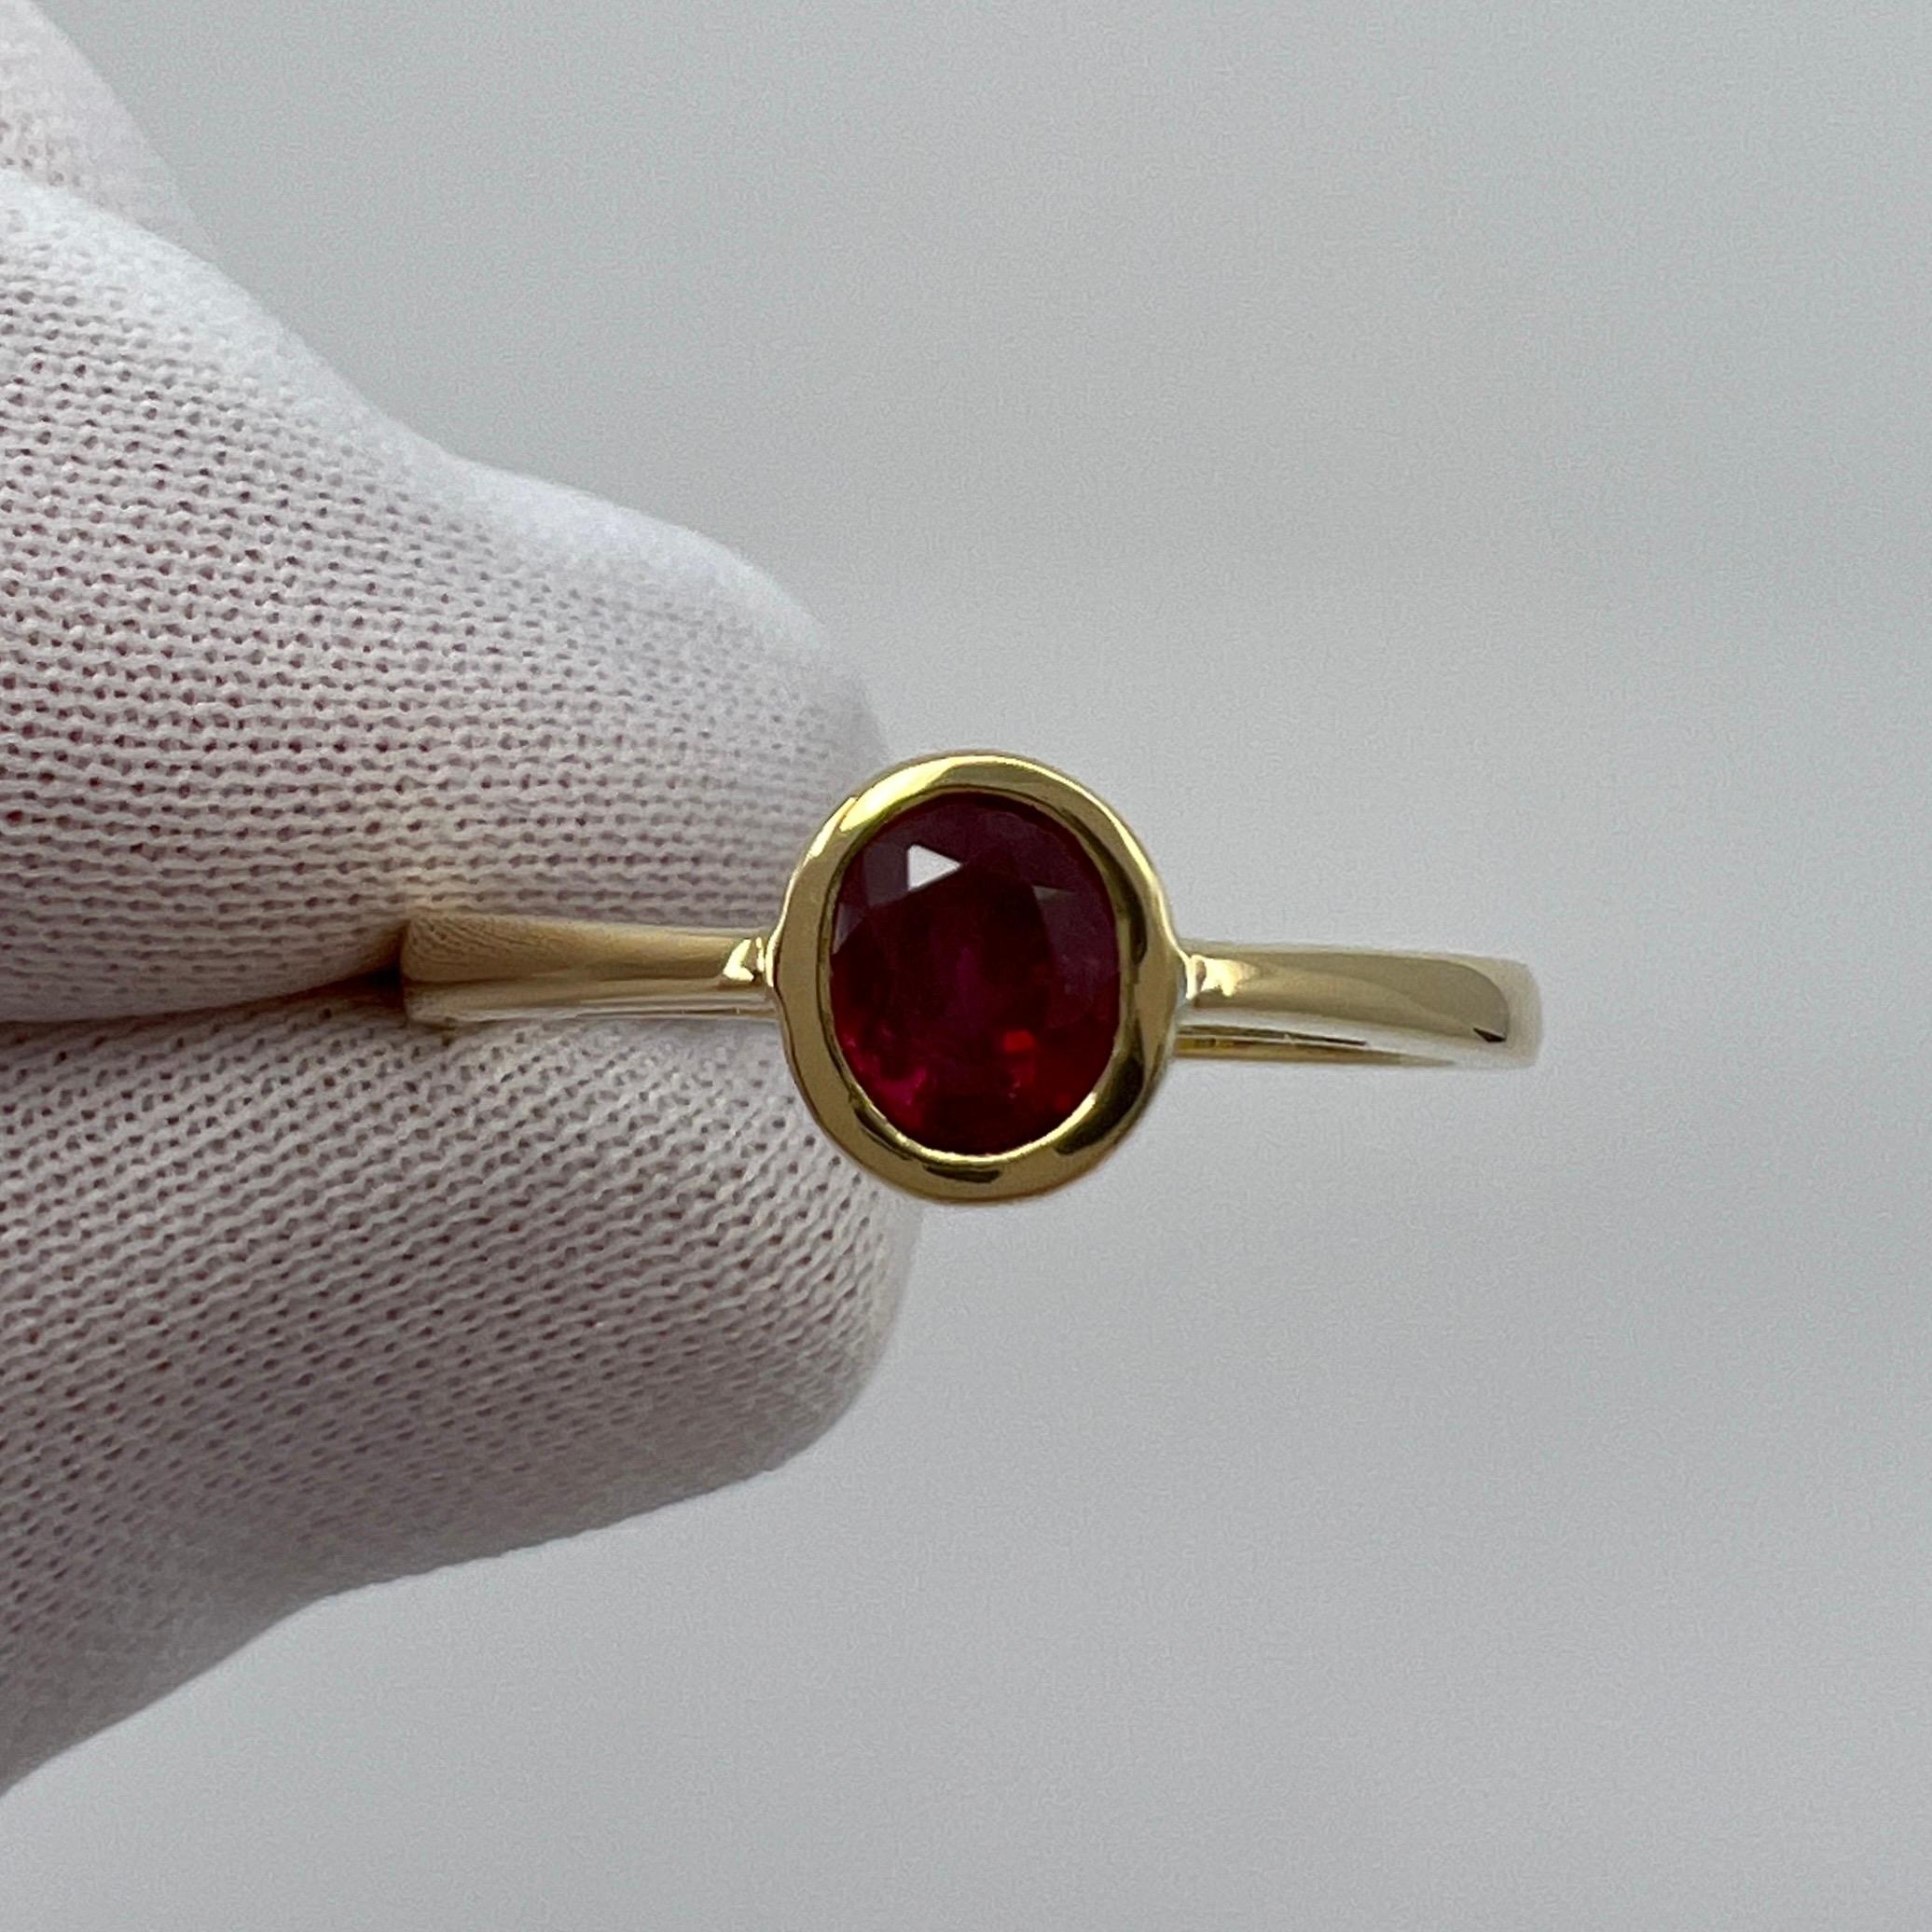 0,75ct Vivid Red Ruby Oval Cut 18k Gelbgold Lünette Rubover Solitaire Ring im Angebot 5